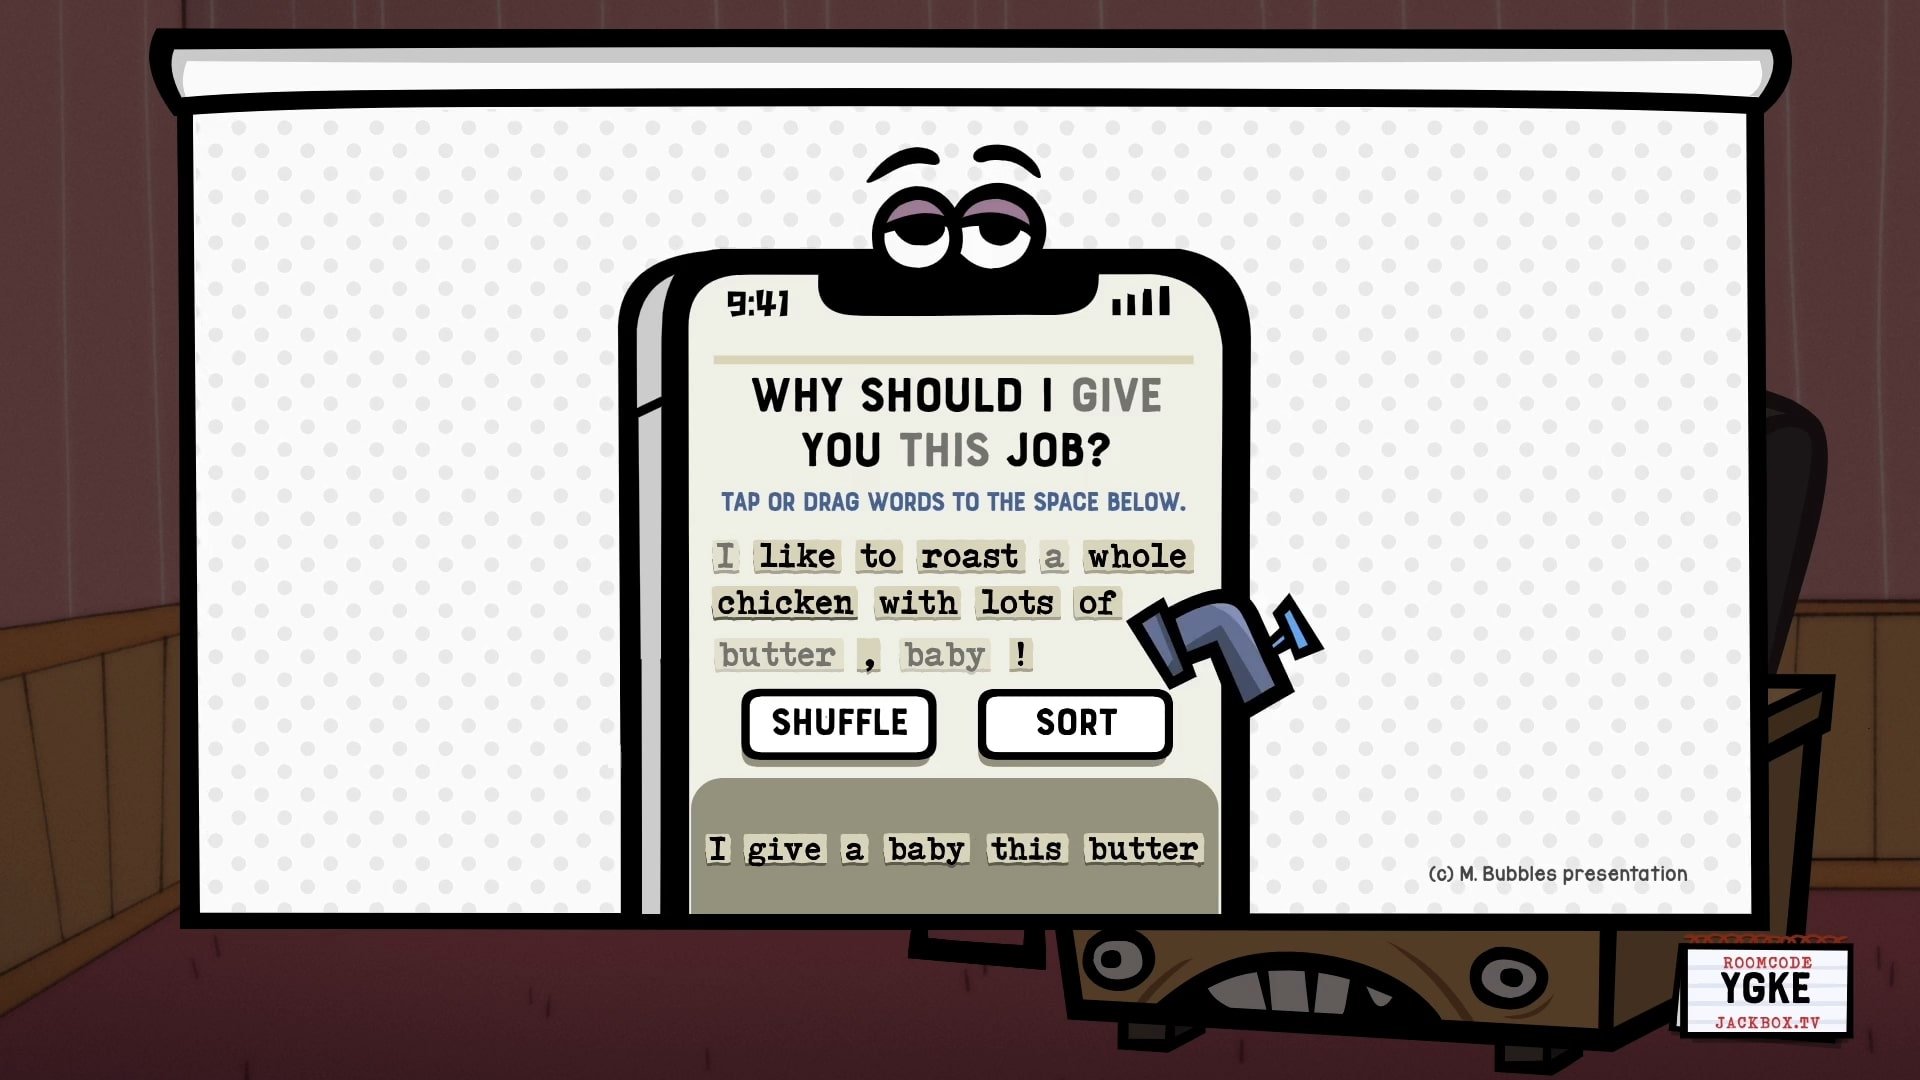 Screenshot from Job Job of the "why should I give you this job screen